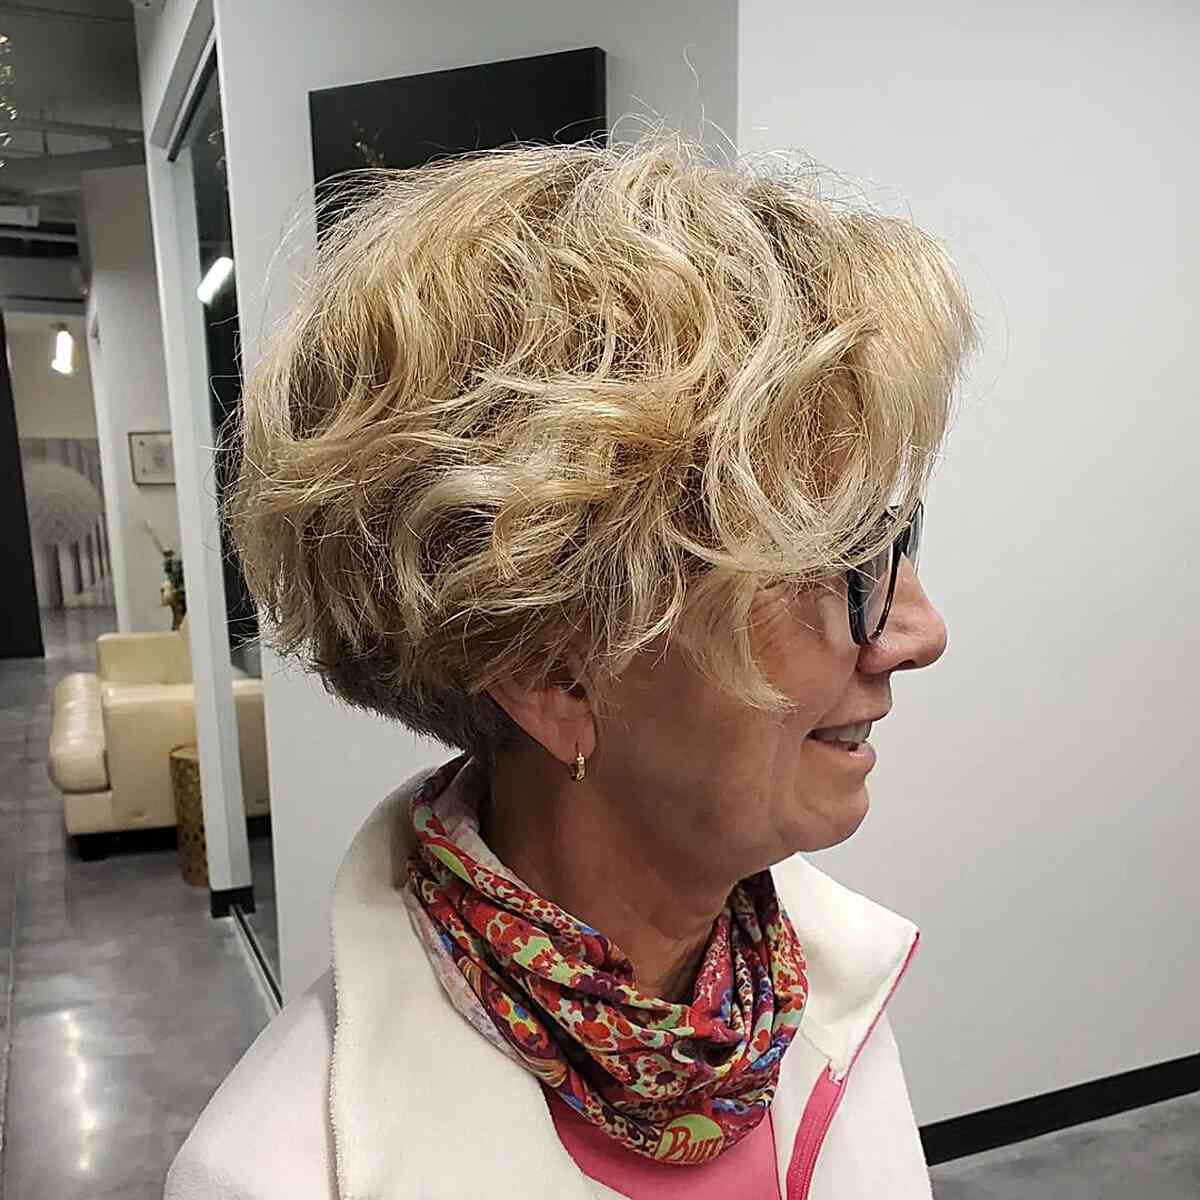 Messy Bob Cut for Wavy Hair for Women Over 60 with glasses